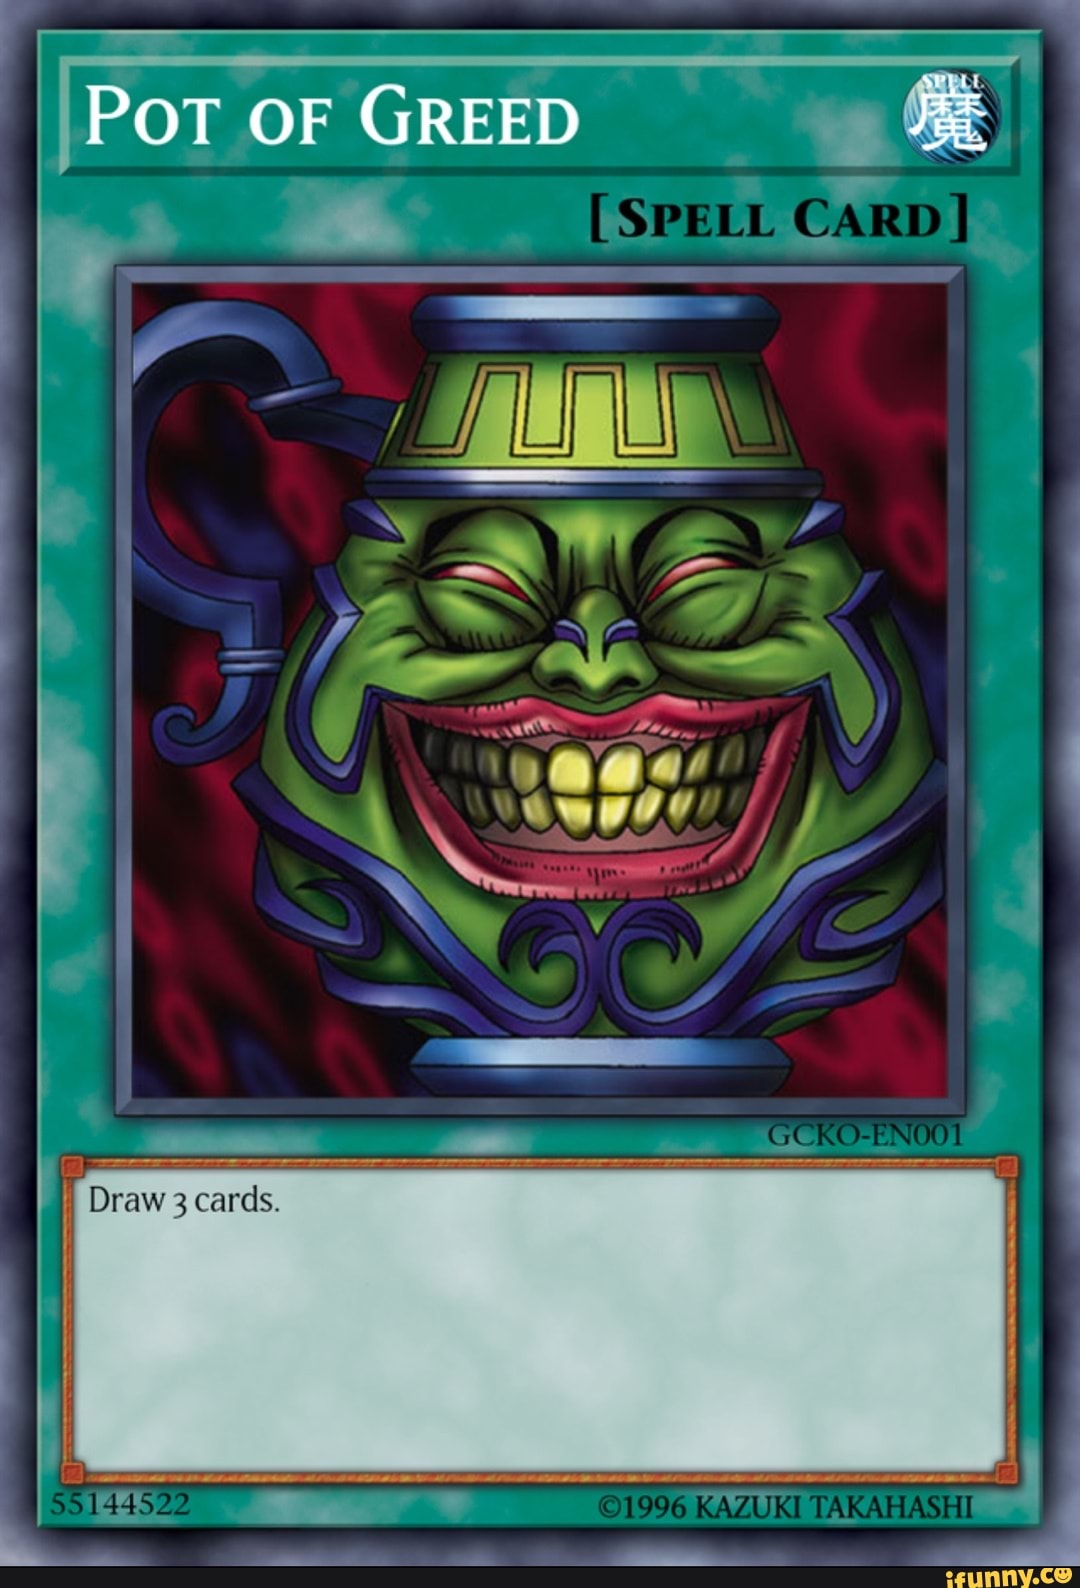 POT OF GREED [SPELL CARD] Draw 3 cards, SS144822 996 KAZUINT TAKARASET